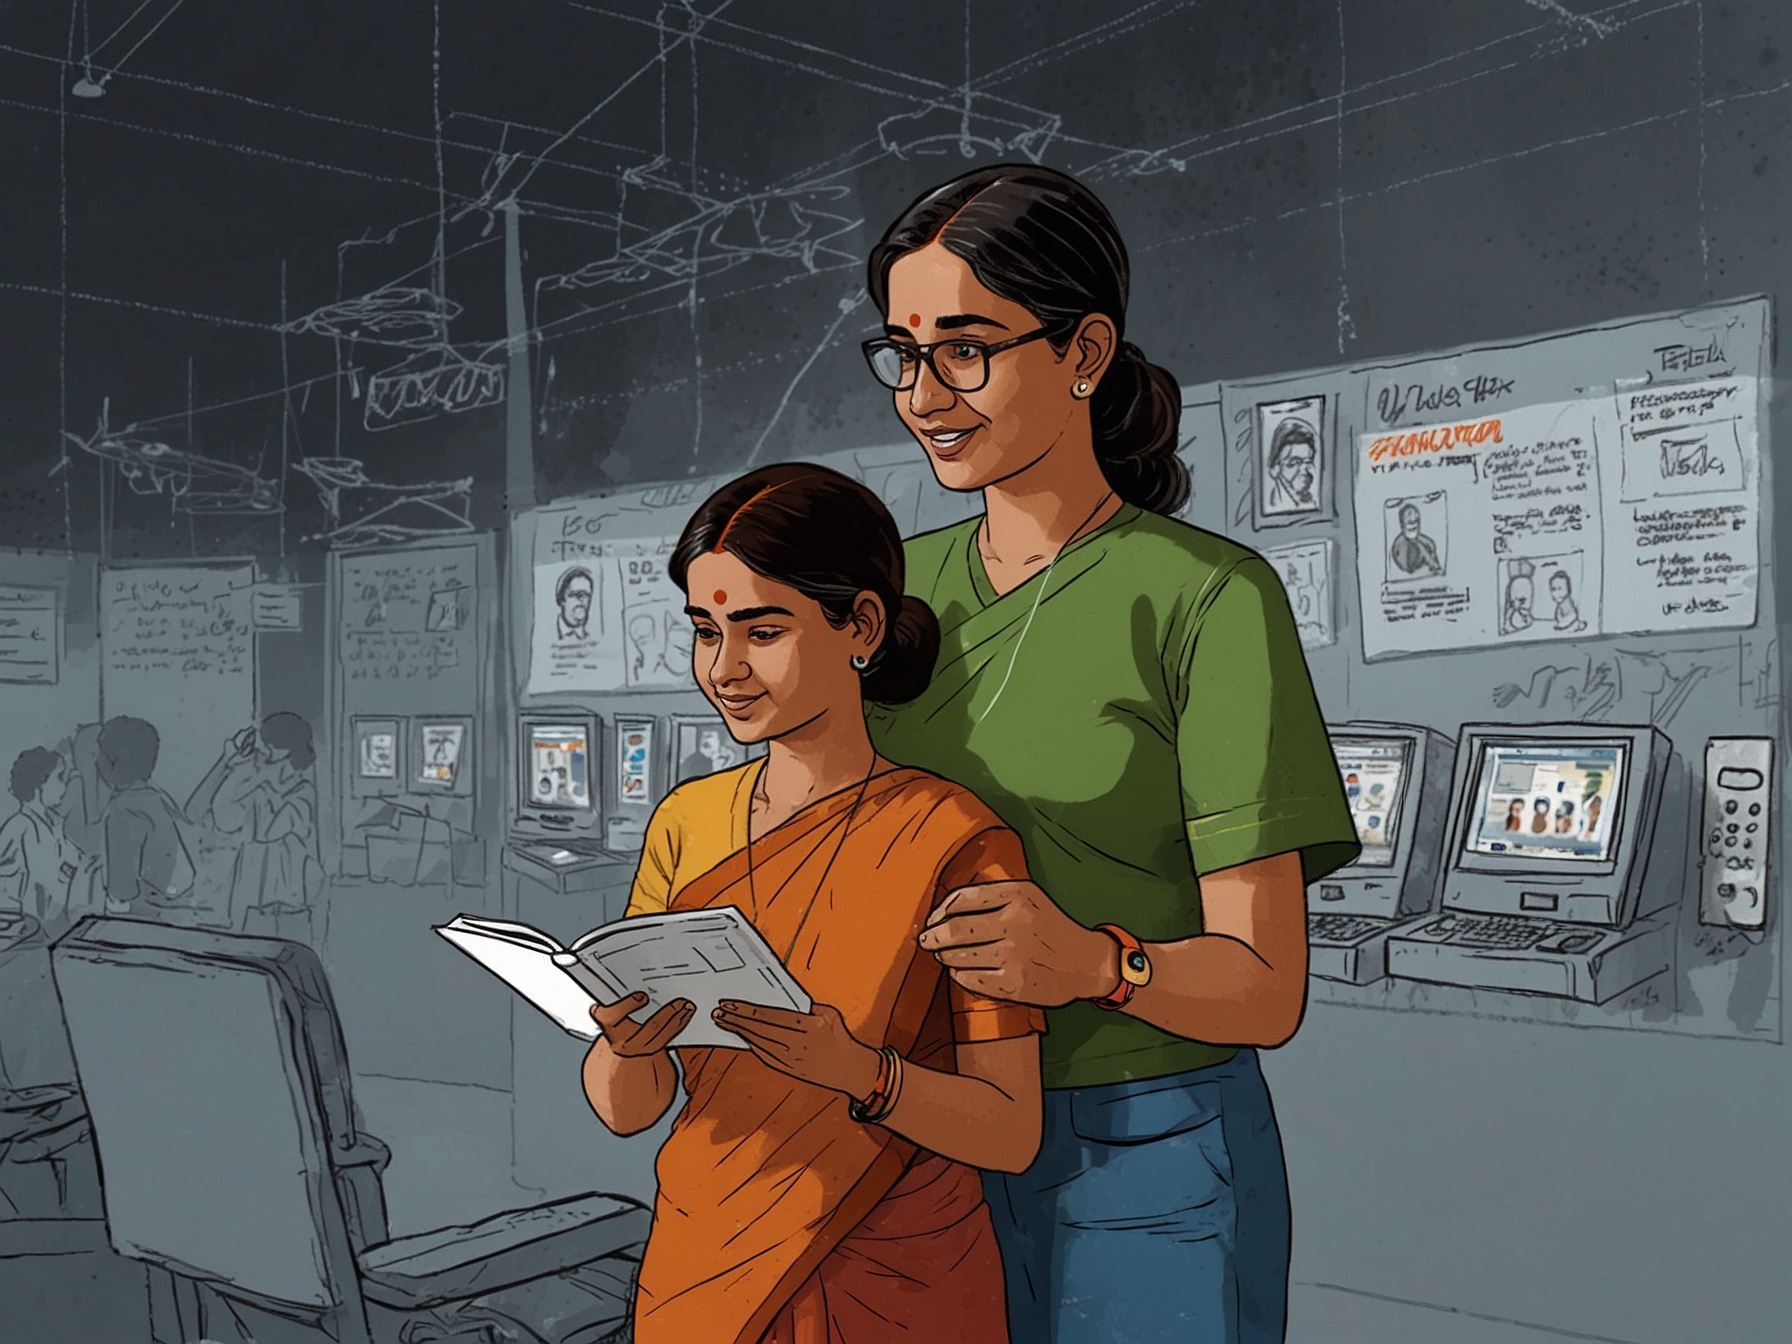 An illustration showing India's initiatives like Aadhaar and UPI, highlighting how technology empowers people, improves access to essential services, and promotes inclusive growth.